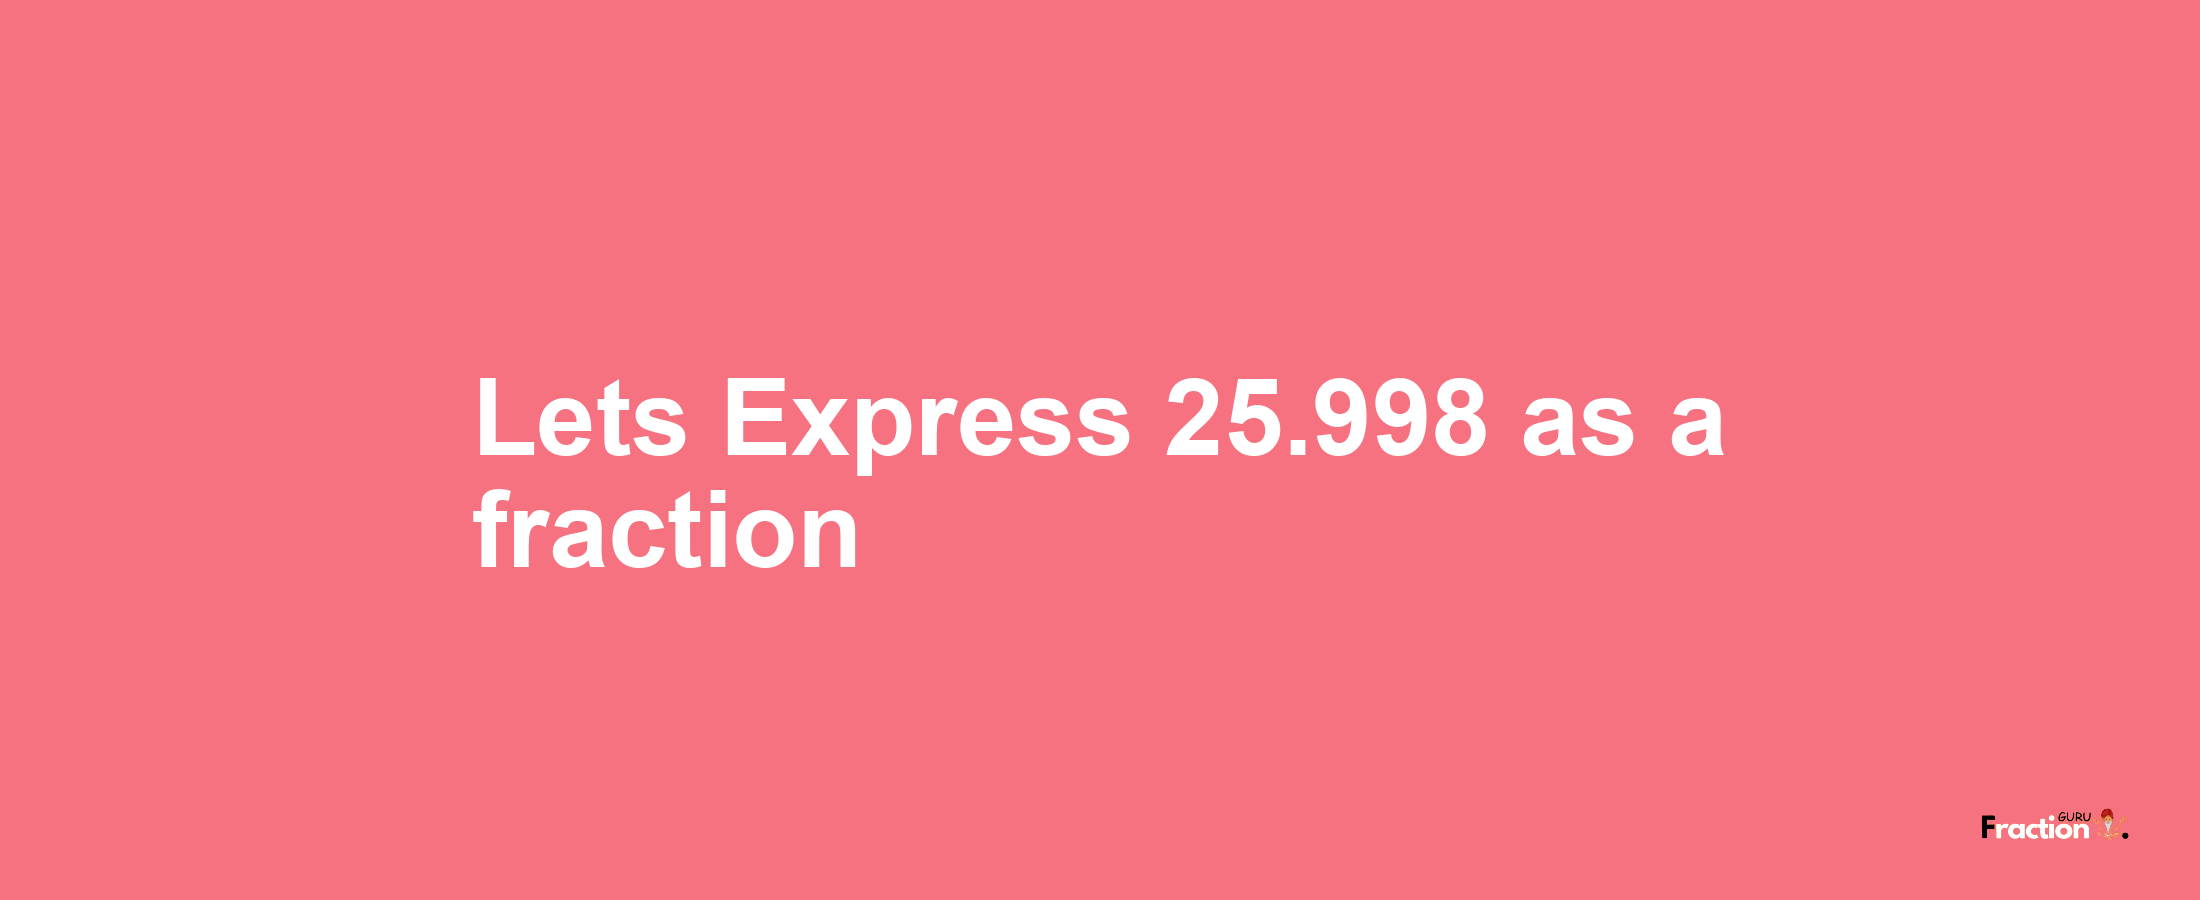 Lets Express 25.998 as afraction